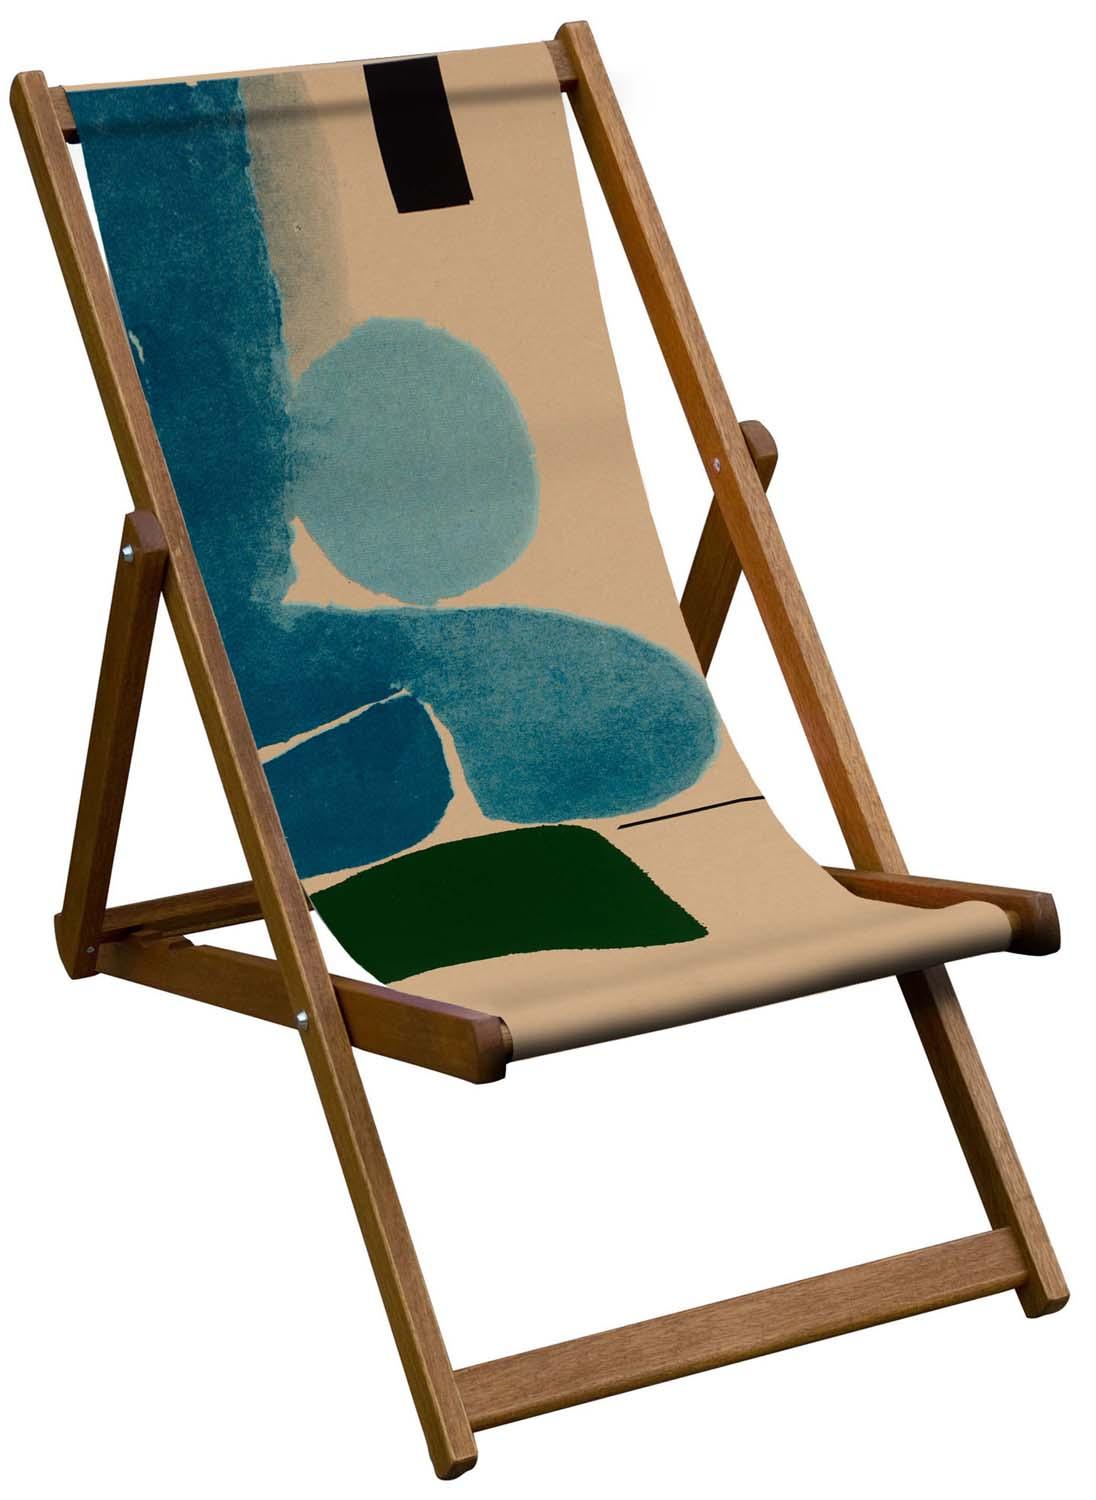 Point Of Contact - TATE - Victor Pasmore Deckchair